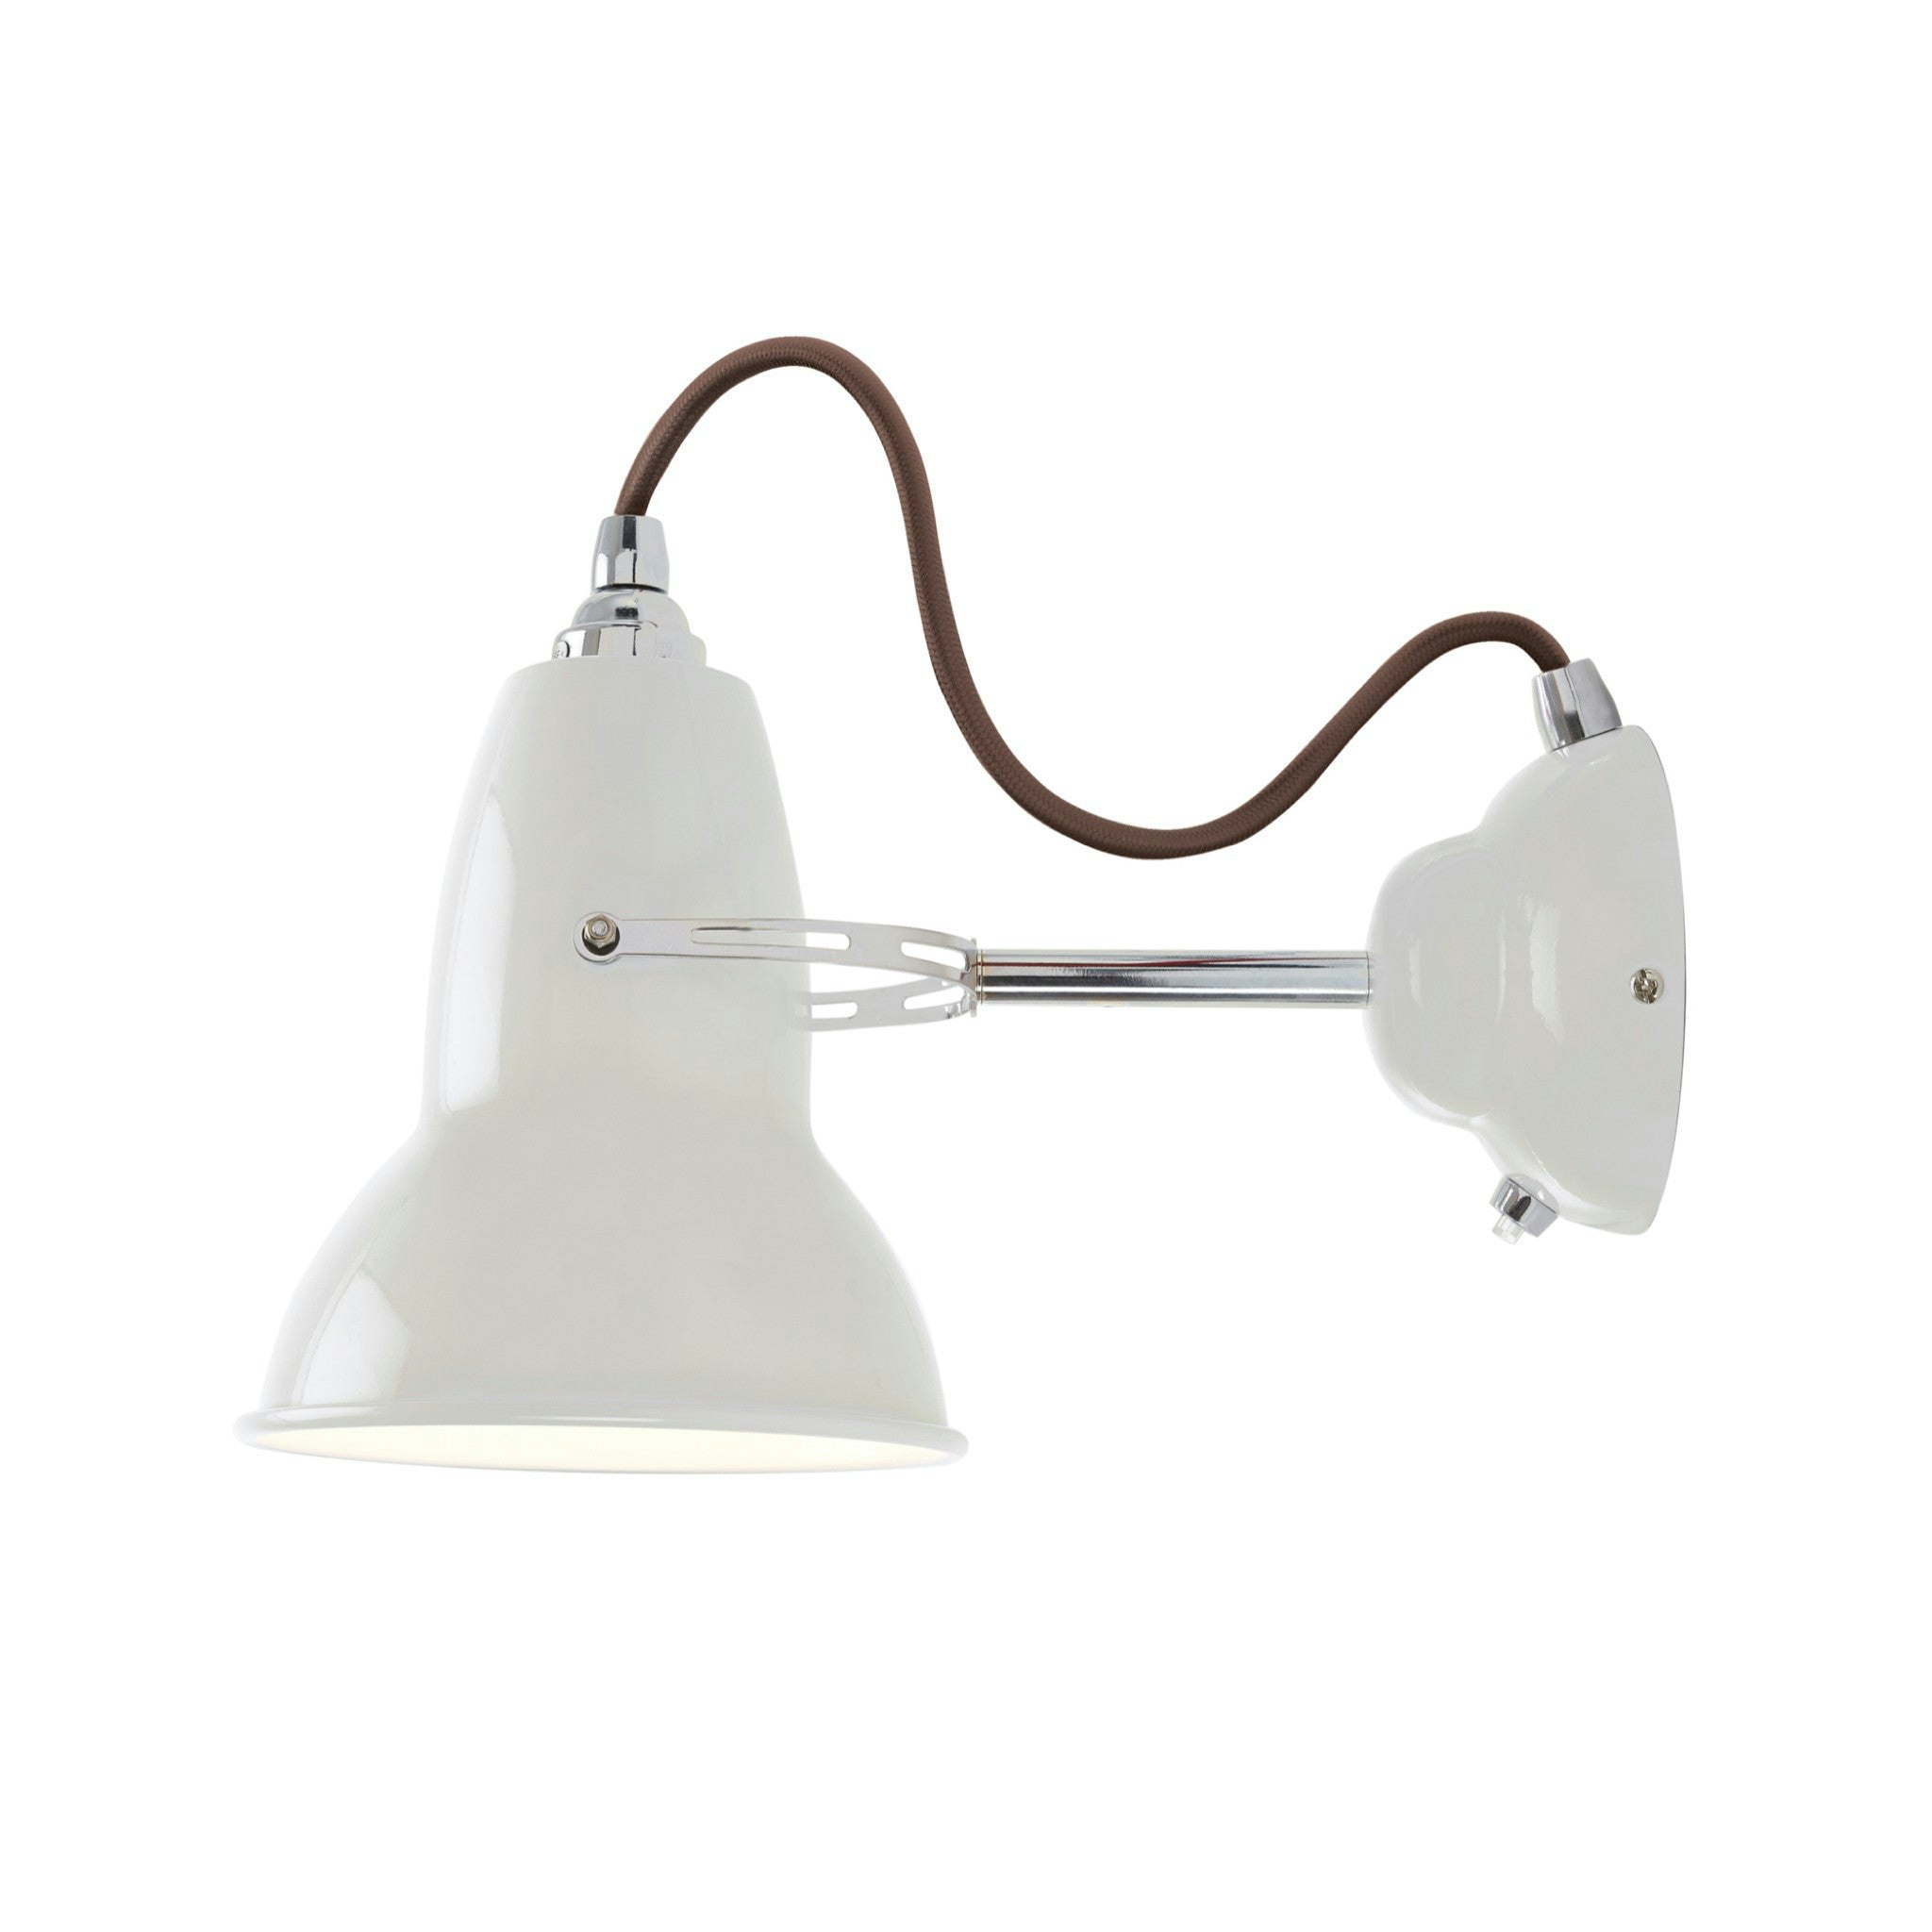 Original 1227 Wall Light by Anglepoise